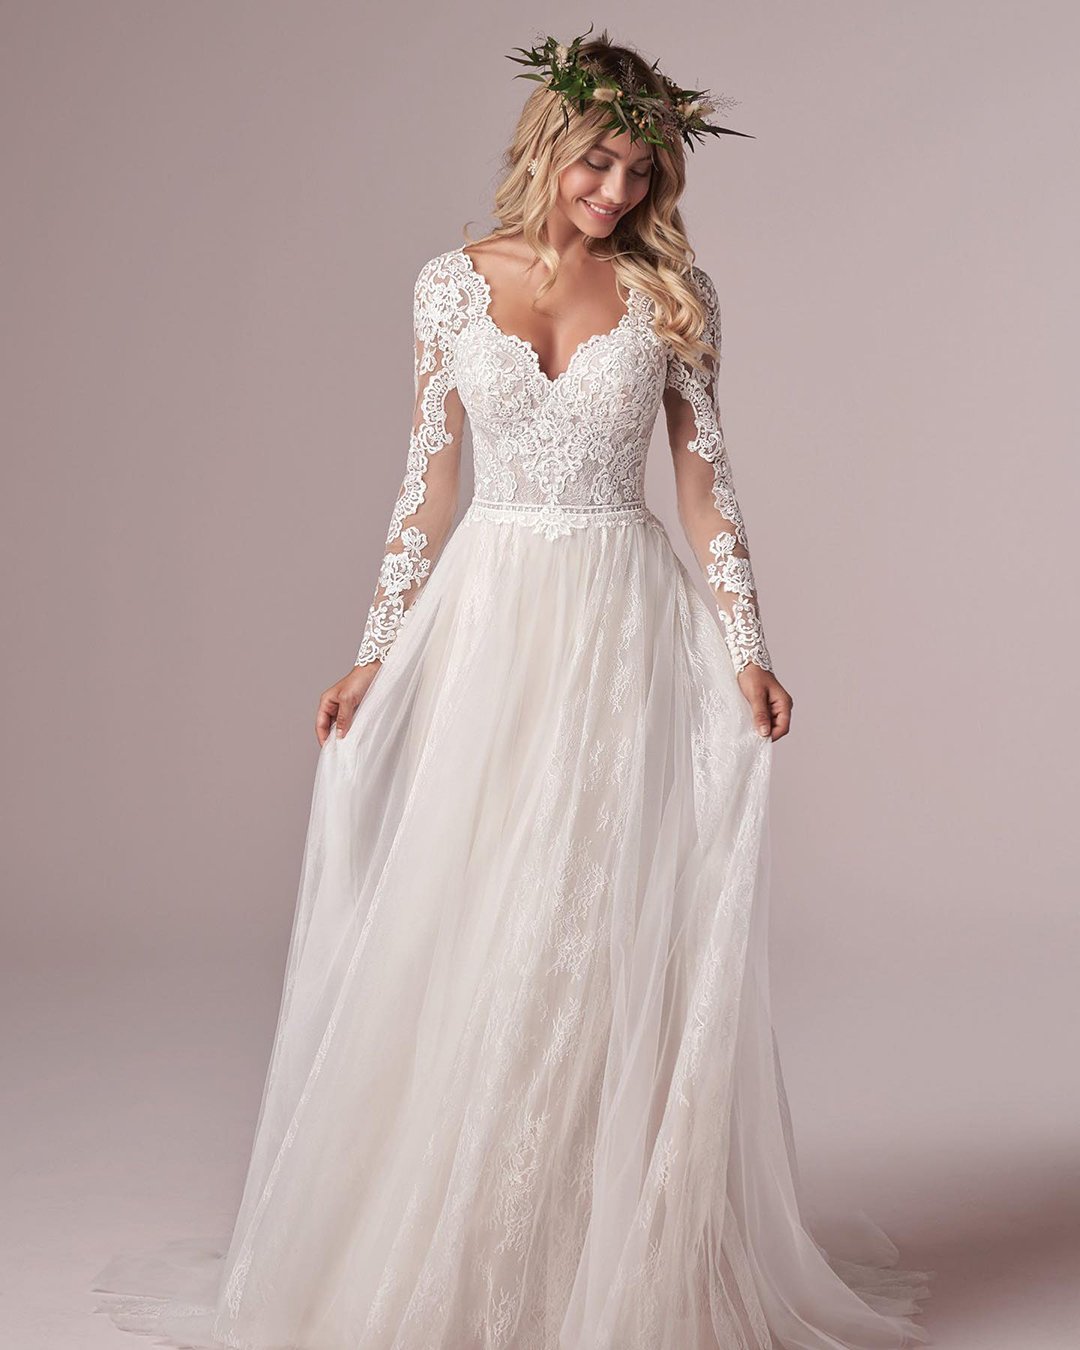 rustic wedding dresses a line with long sleeves lace sweetheart maggiesottero